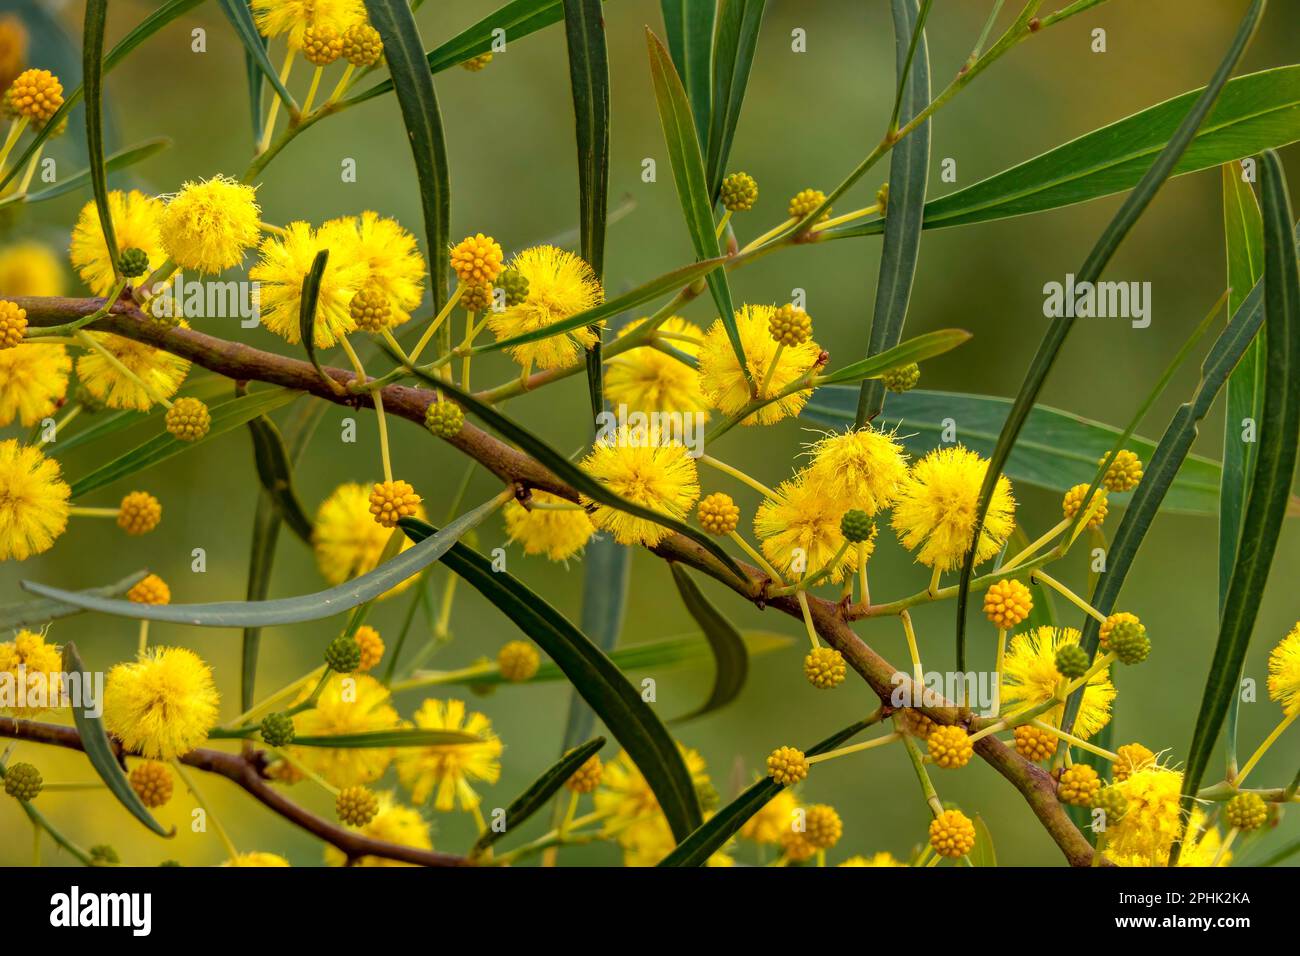 Yellow ball flowers of a flowering tree Acacia saligna close up on a blurred background Stock Photo